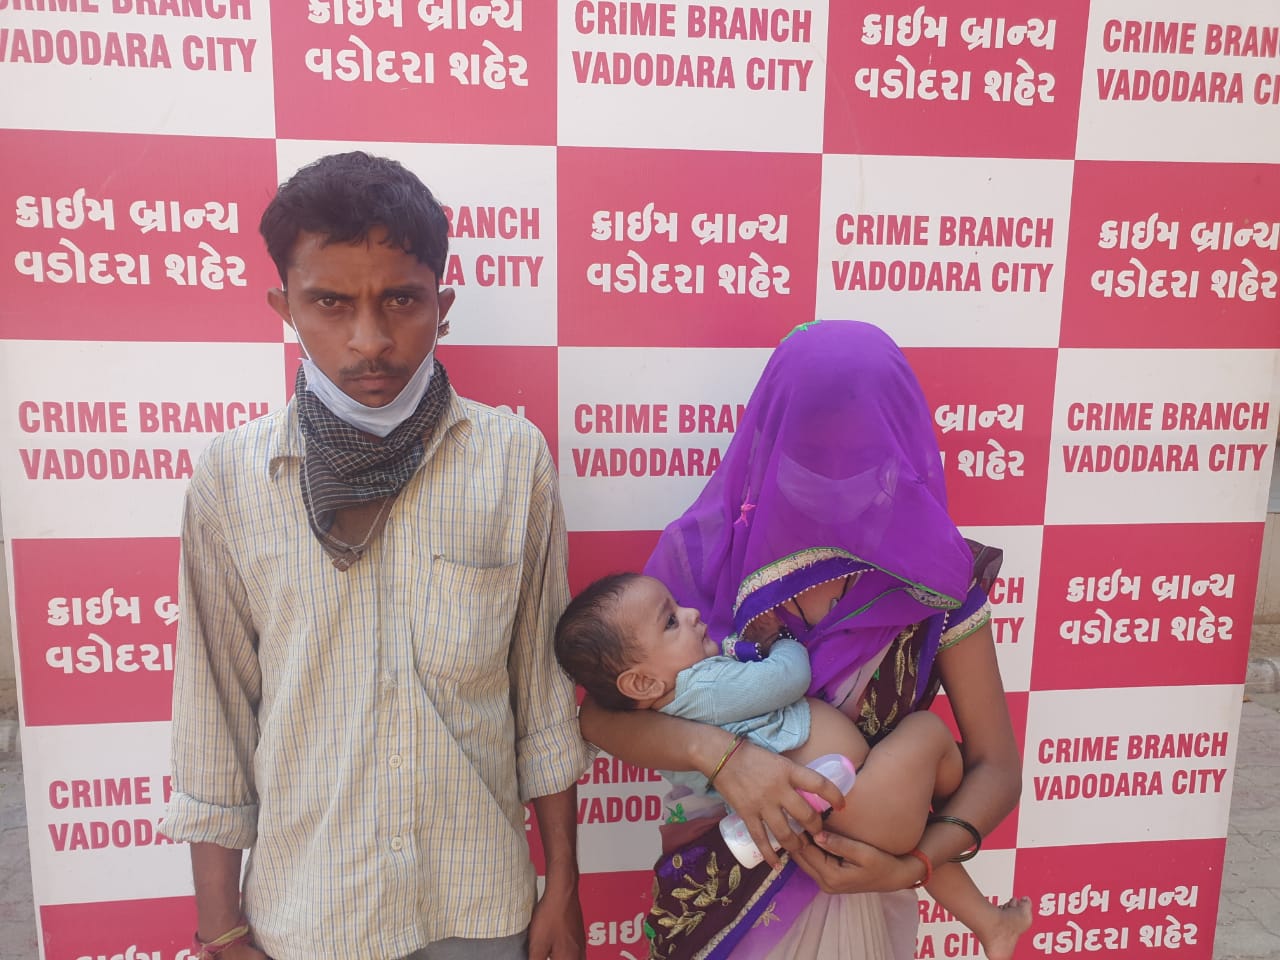 Vadodara crime branch arrested couple for kidnapping a six months old infant from Surat